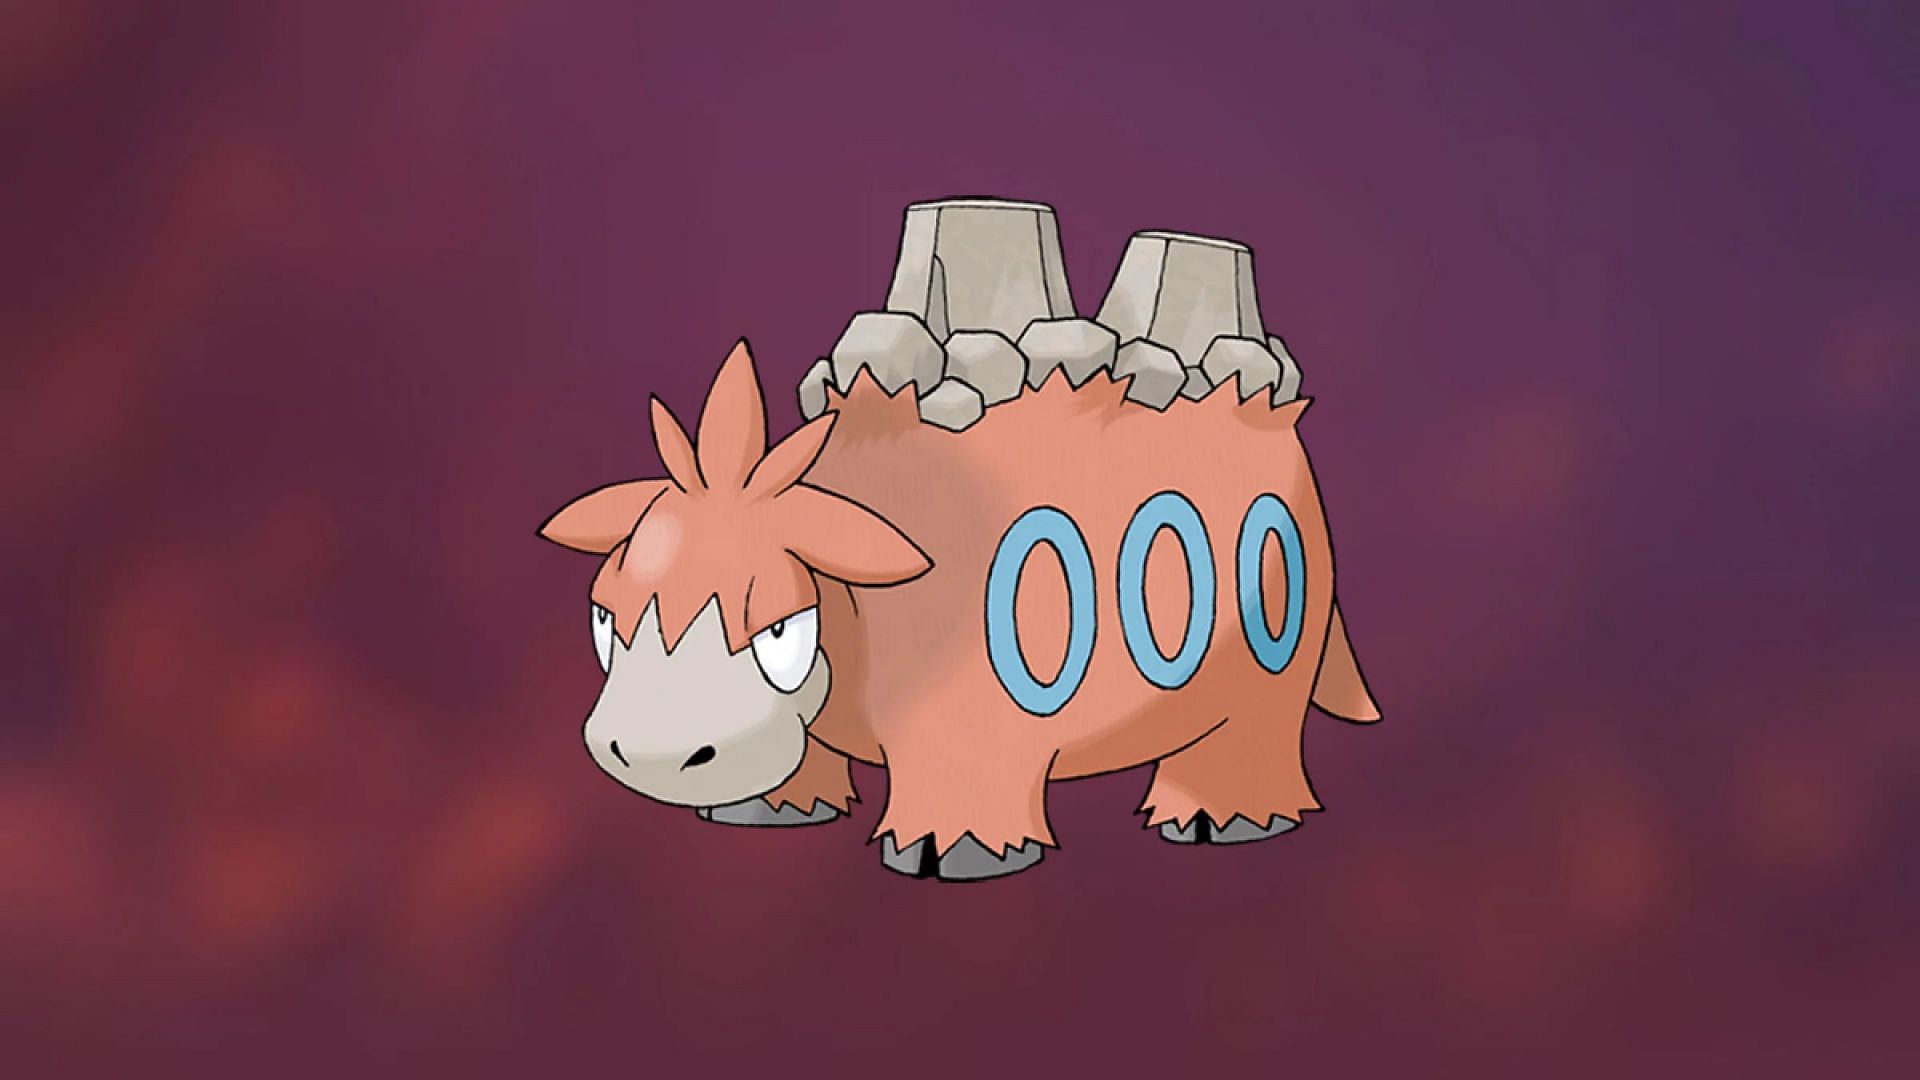 Camerupt is a Fire/Ground-type Pokemon who has a glaring elemental weakness (Image via The Pokemon Company)